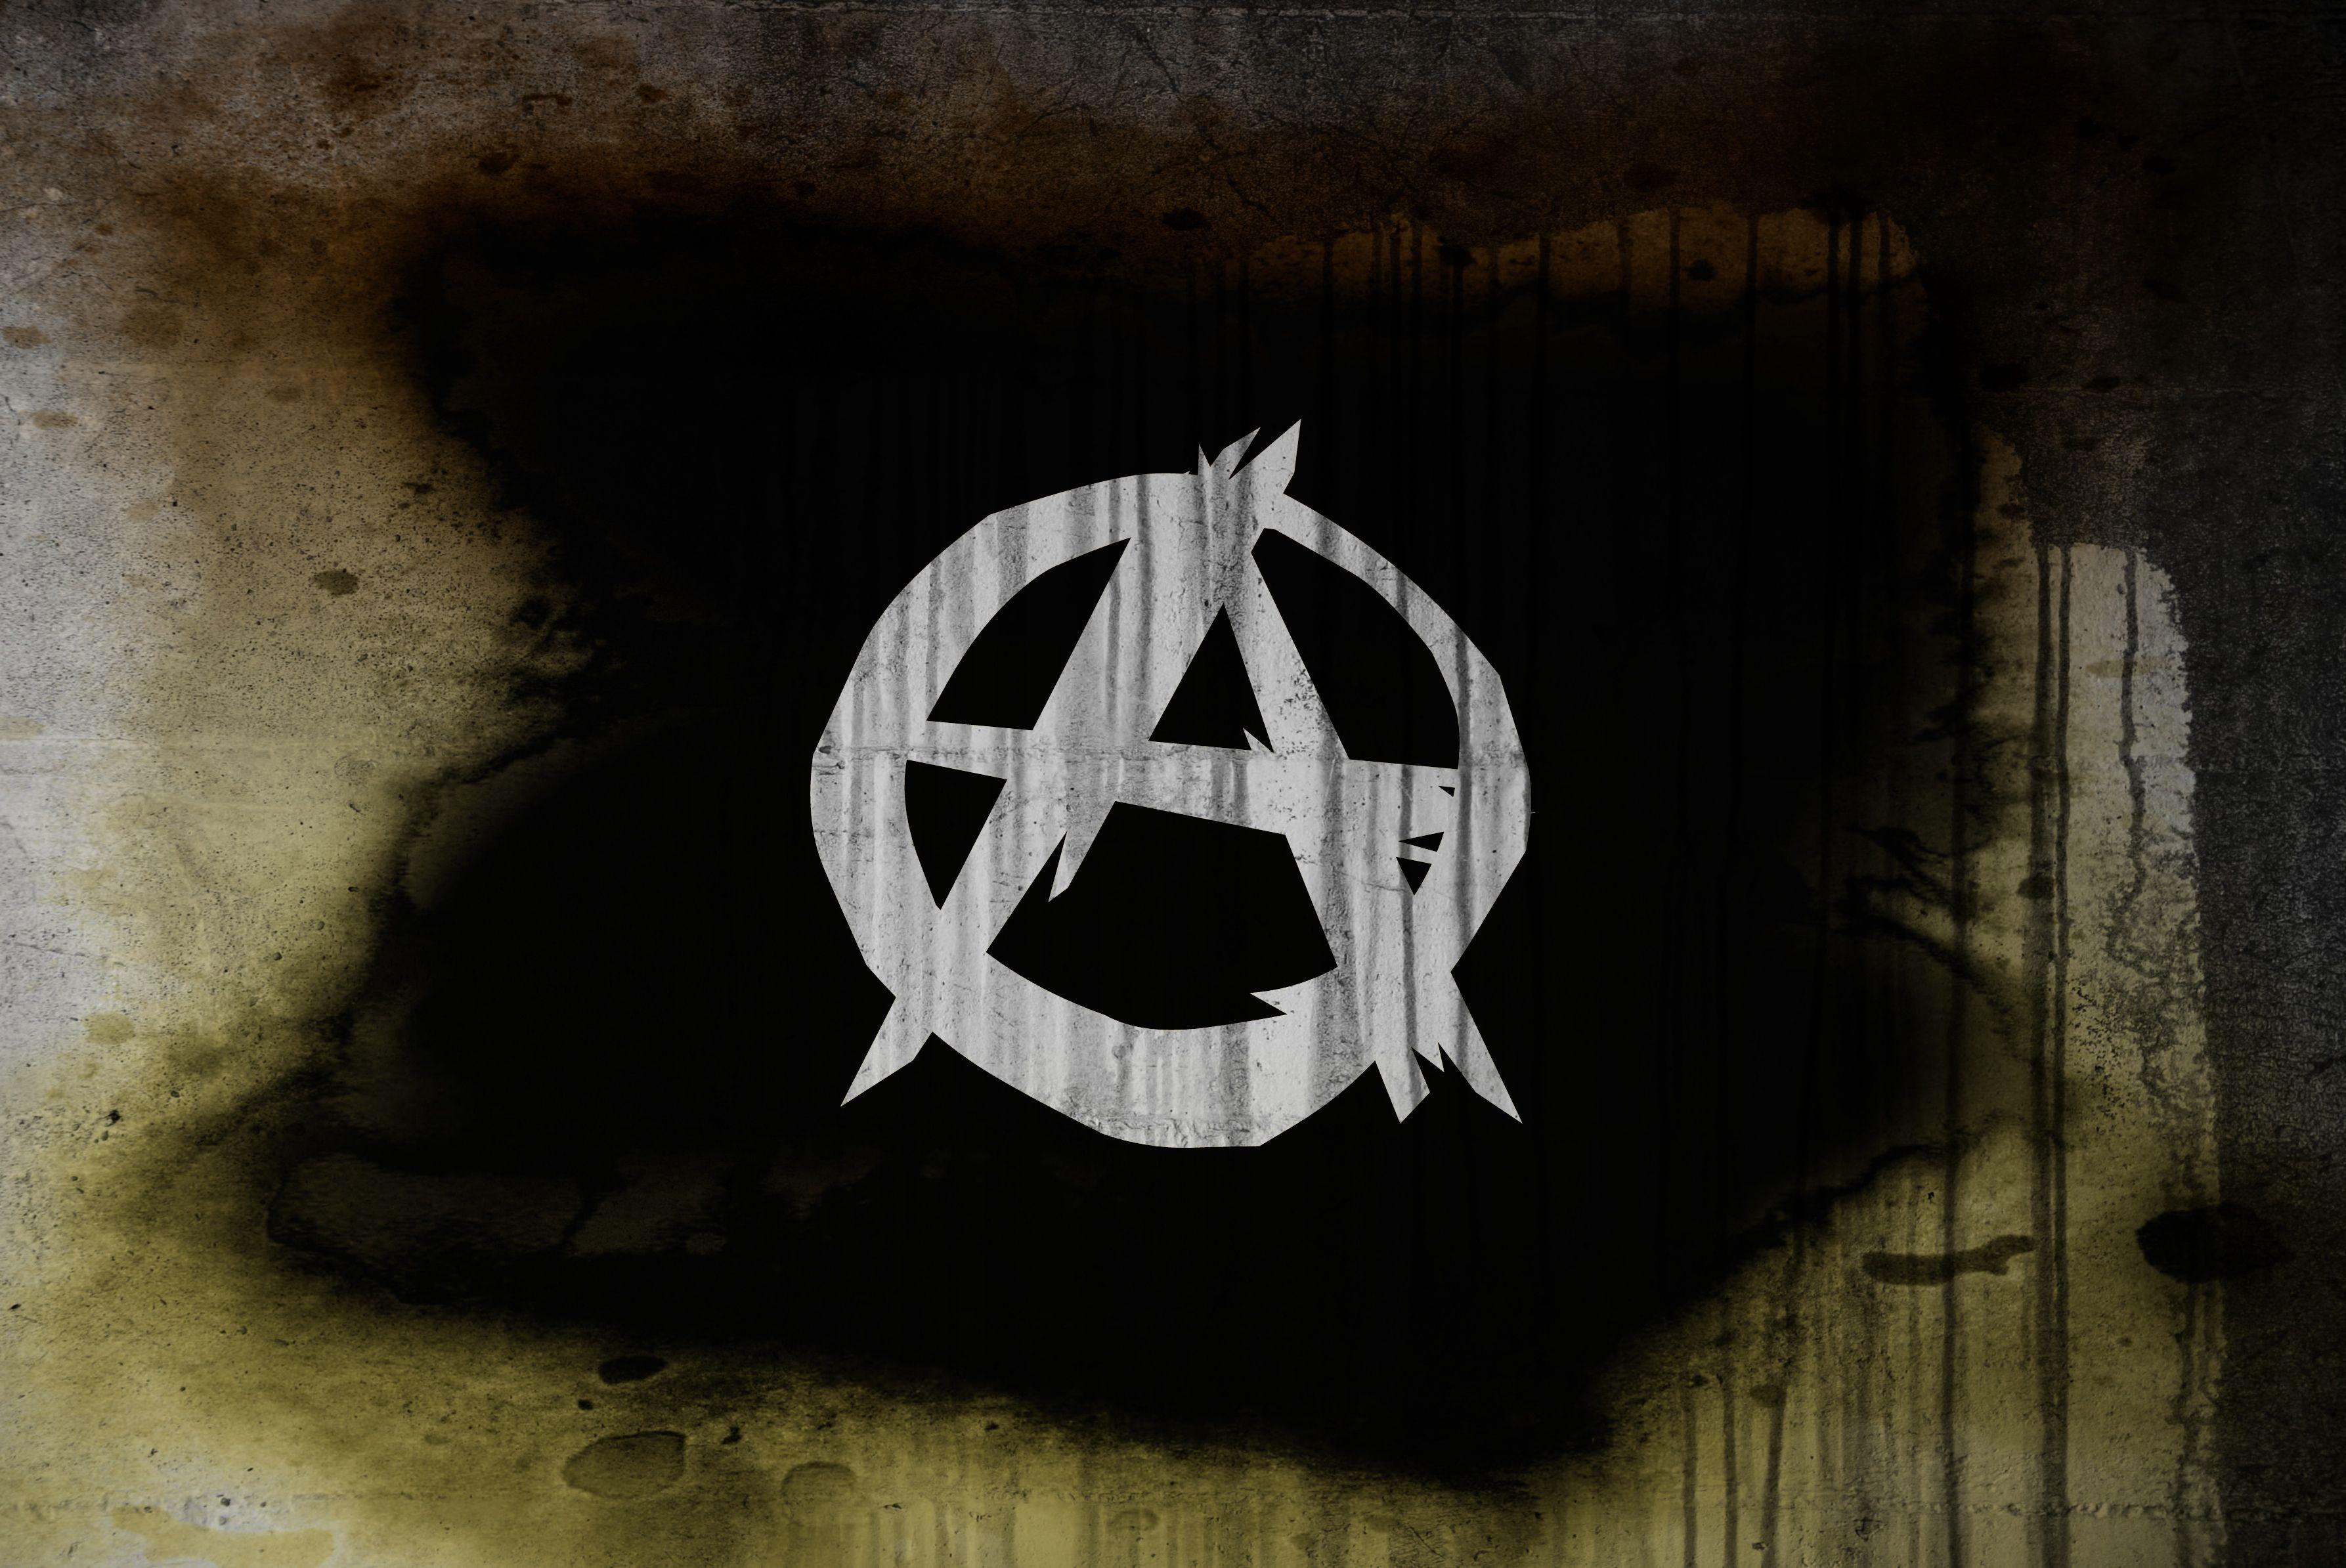 Anarchy HD Wallpaper and Background Image